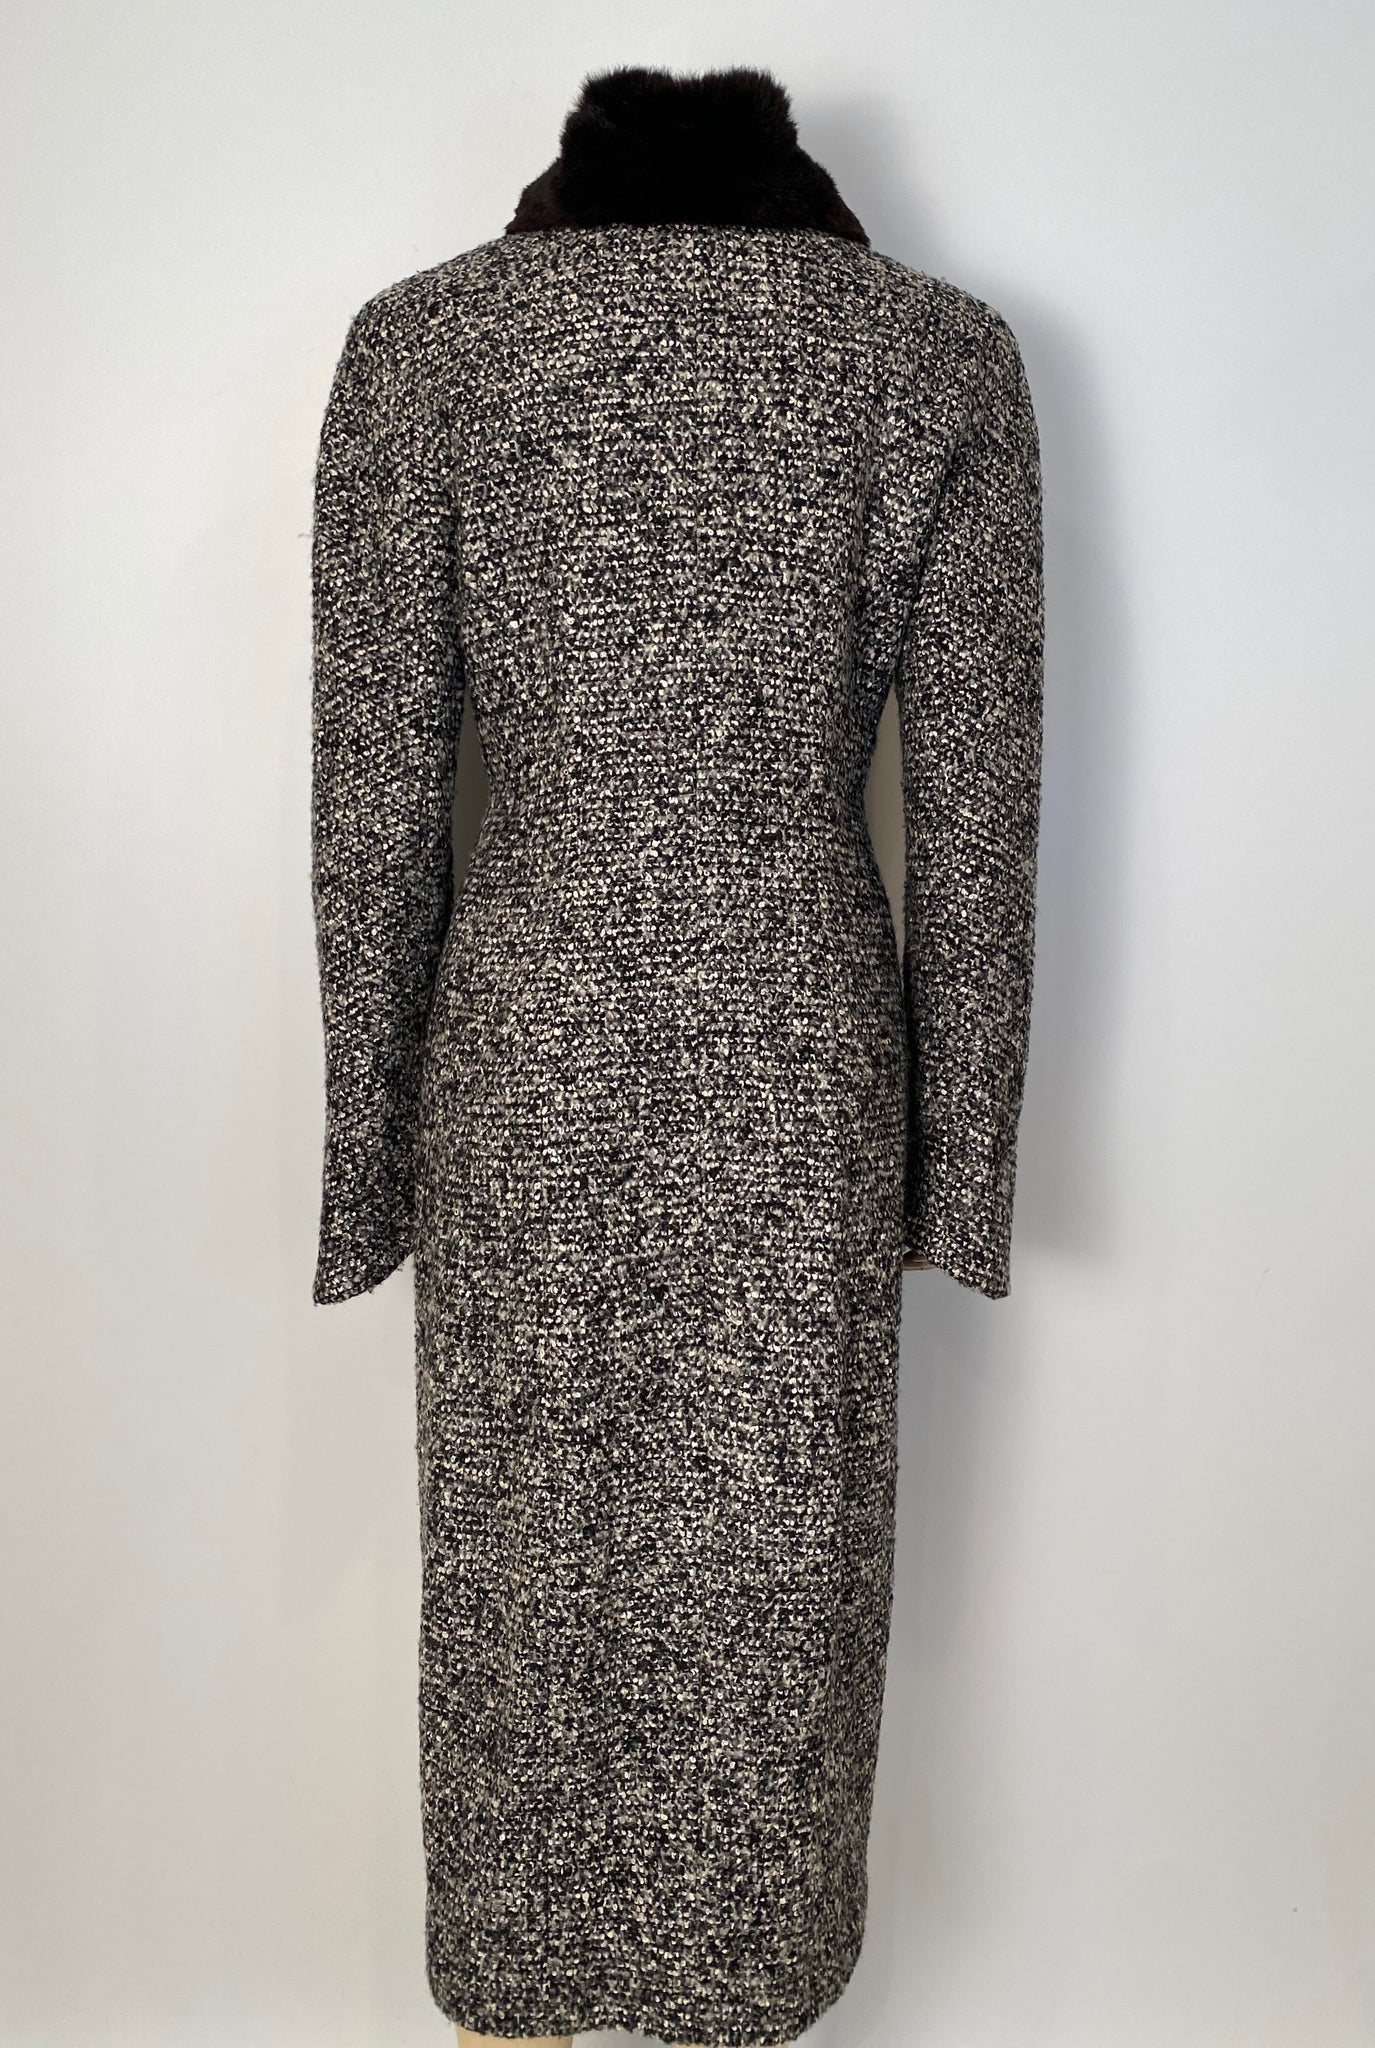 Sophisticated Chanel 02A 2002 Fall Long Wool Tweed Black White Duster –  HelensChanel